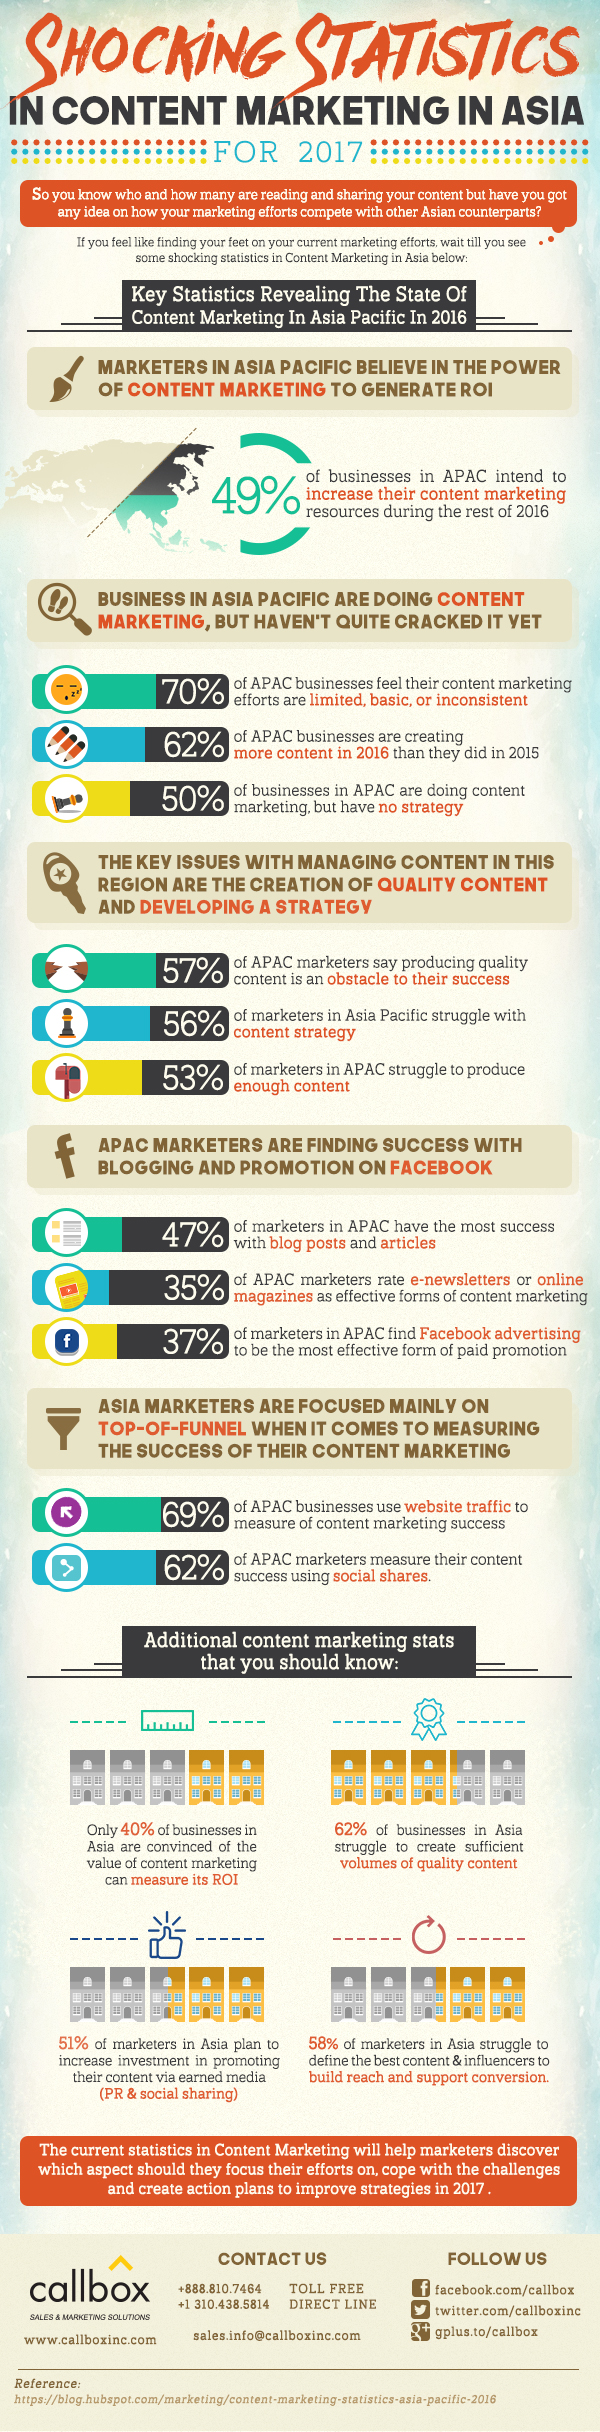 Shocking Statistics in Content Marketing in Asia for 2017 [INFOGRAPHIC]